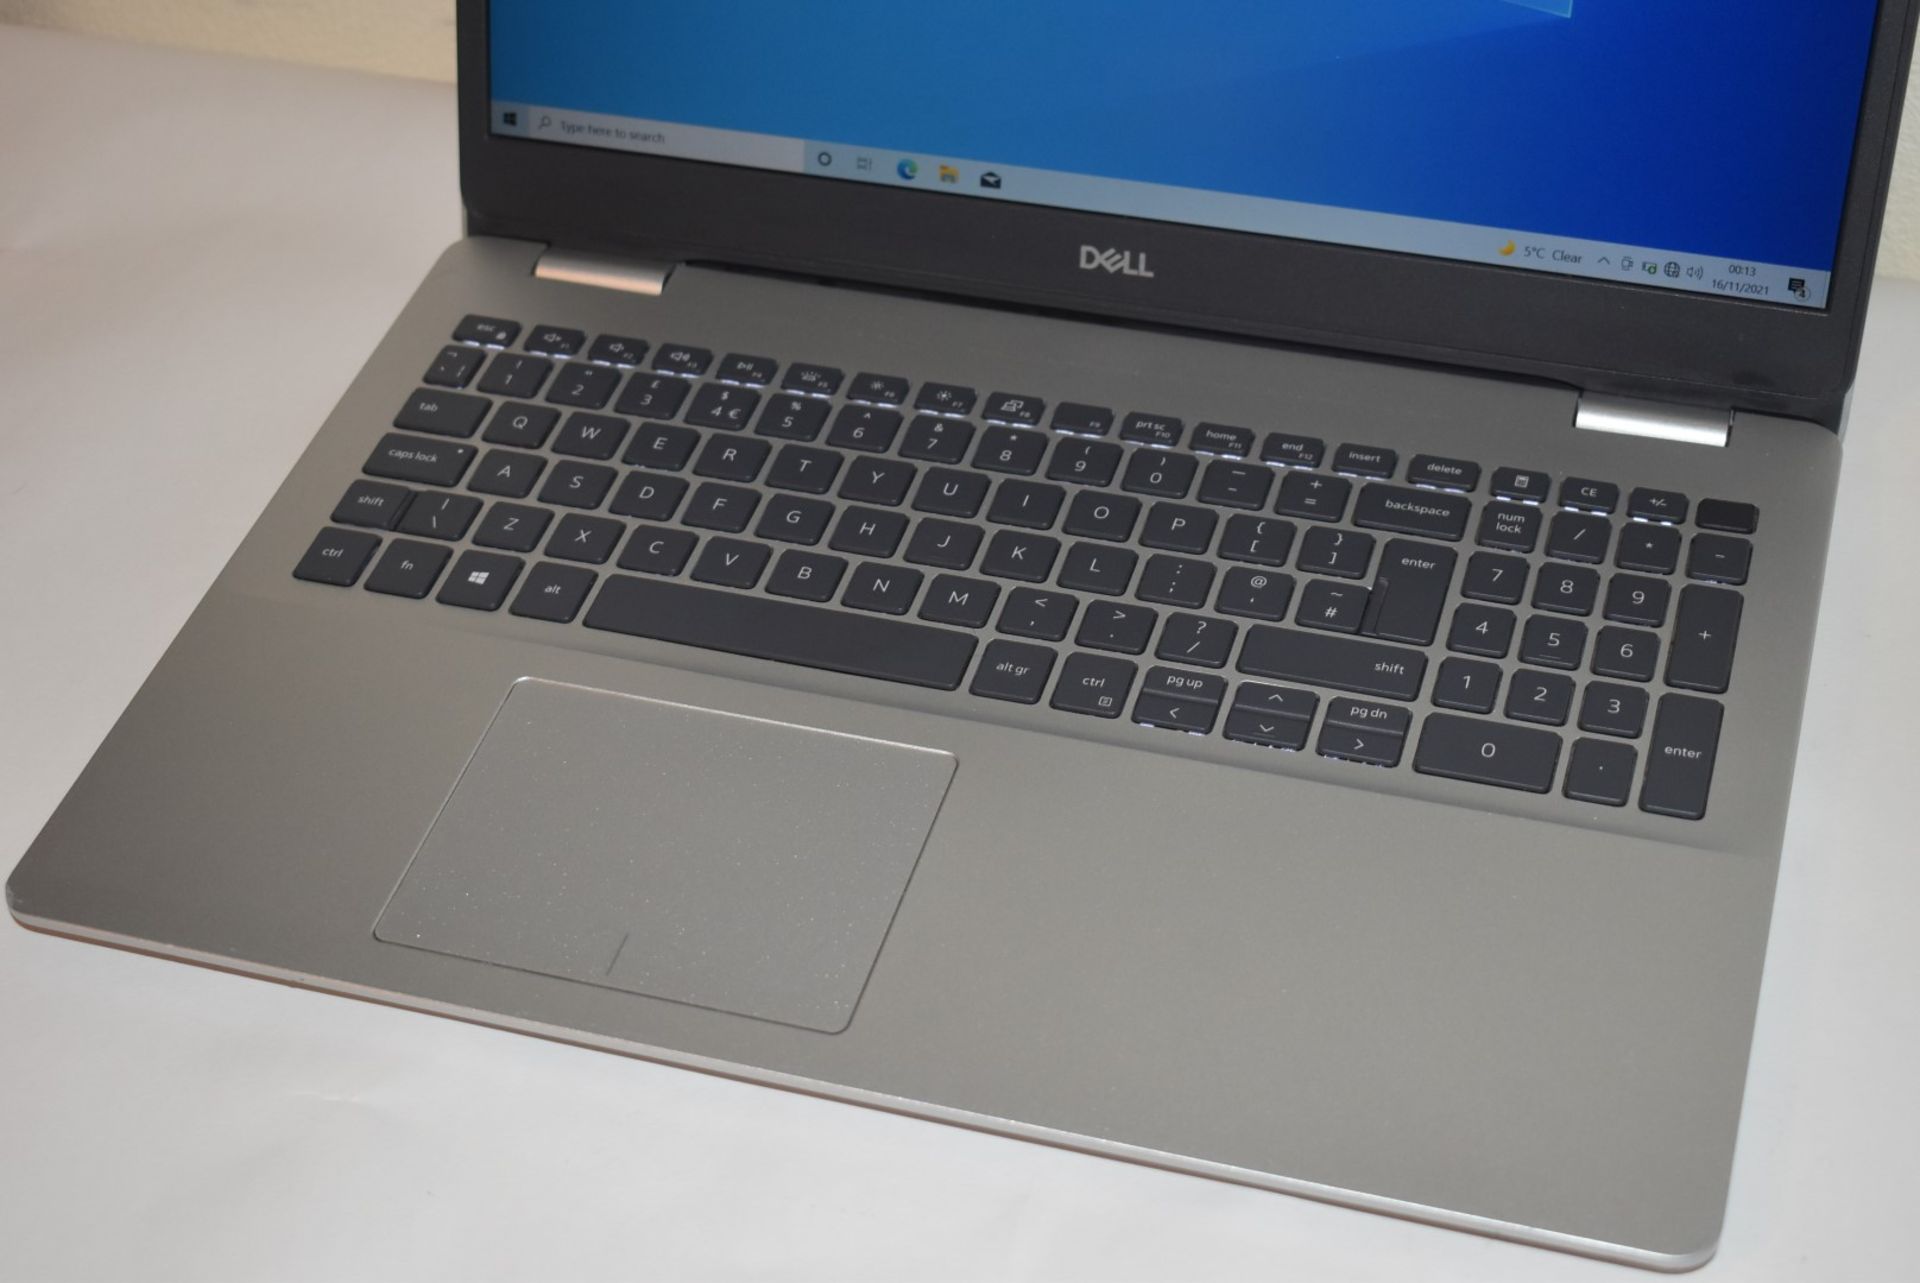 1 x Dell Inspiron 15 5593 Laptop Featuring a 10th Gen Core i5-1035G1 3.6ghz Quad Core Processor, - Image 5 of 18